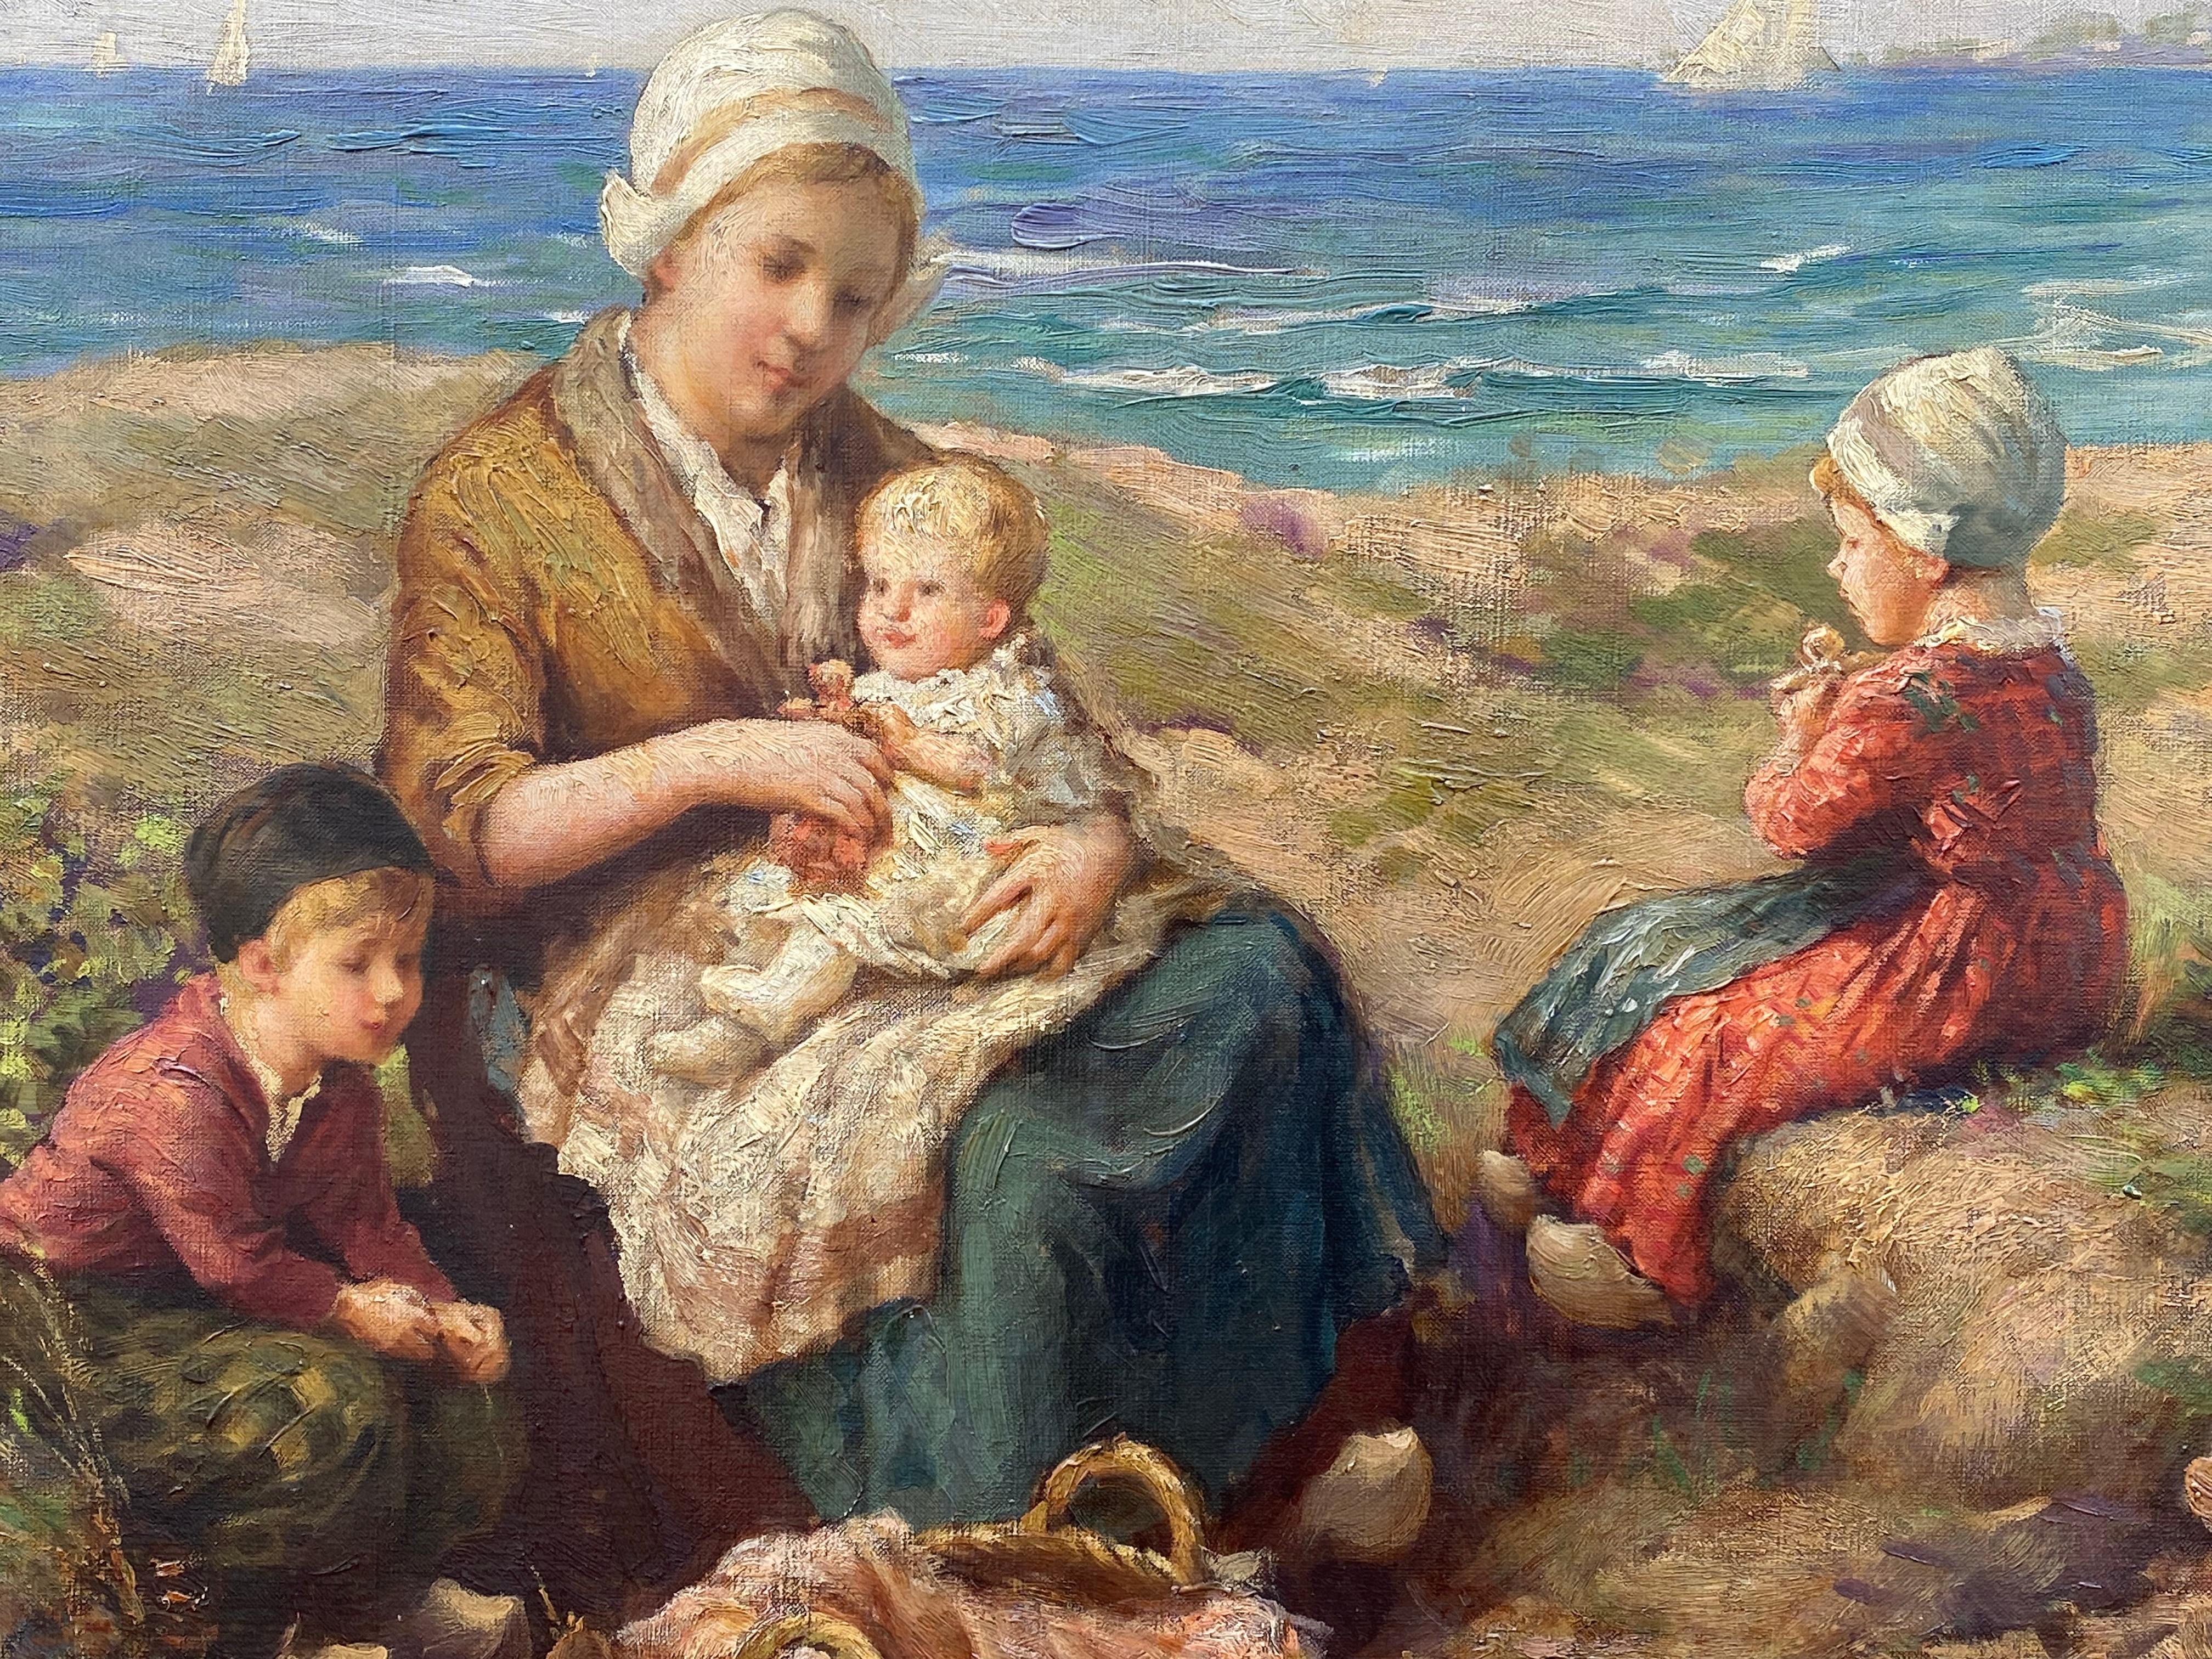 Original oil on canvas painting of a bucolic seaside picnic with a mother and her young children.  Signed by the artist, F. G. Grust lower left. Condition is very good.  The painting is housed in a period style gold leaf frame in fine condition. 